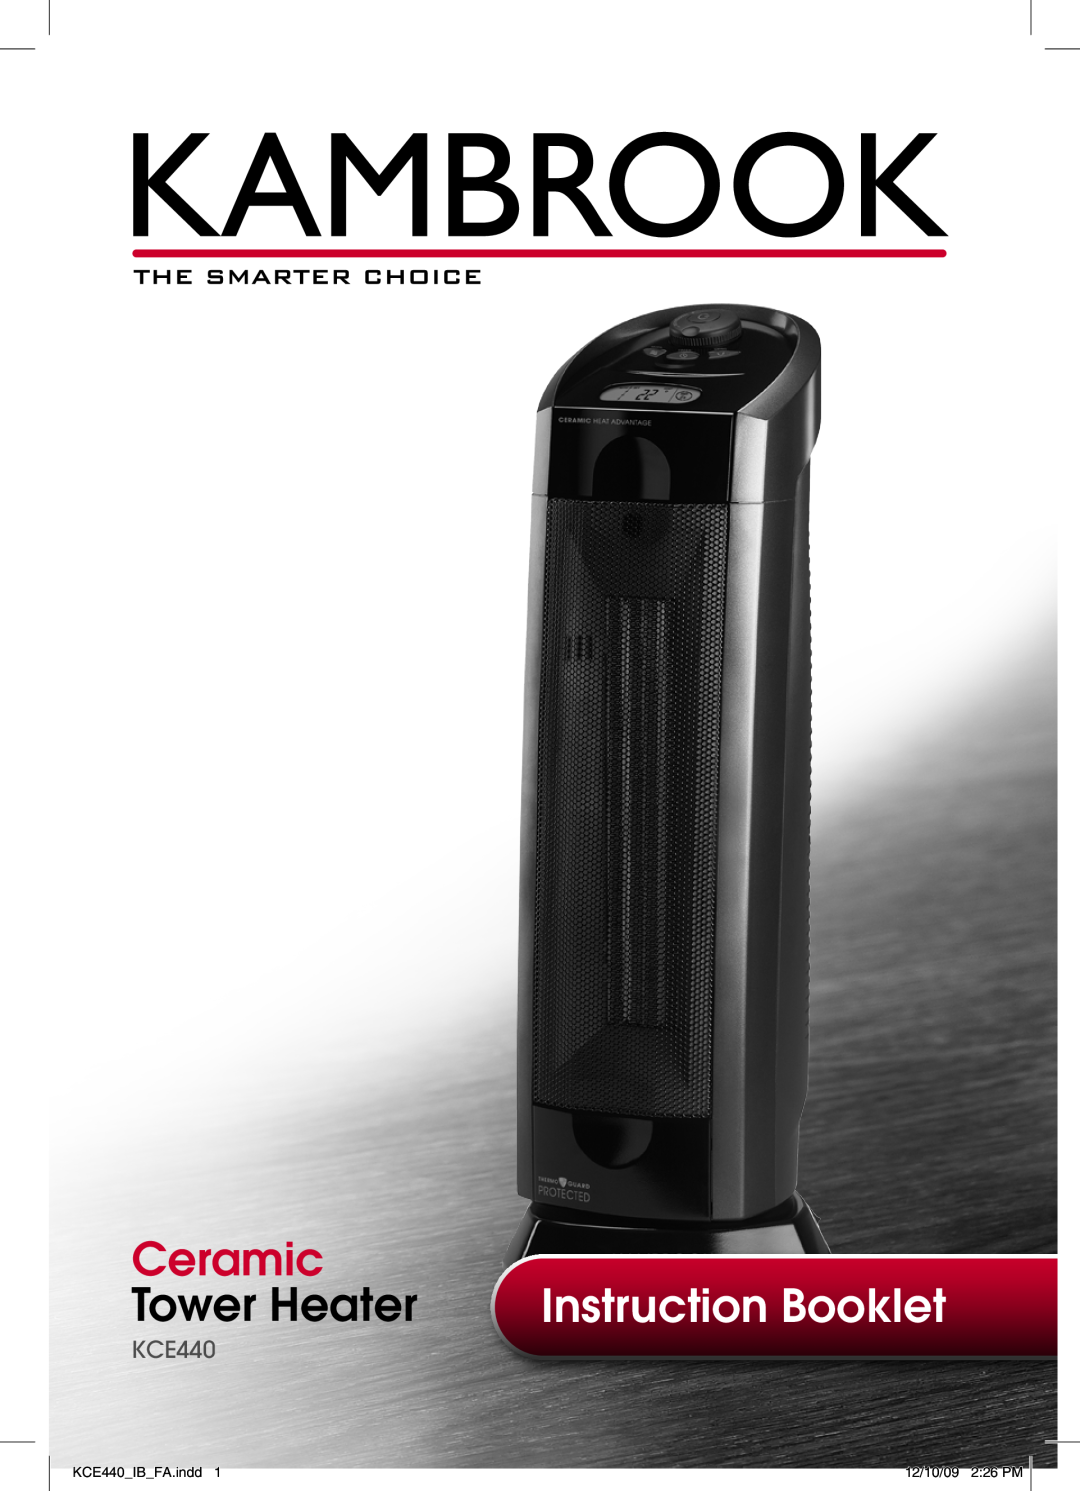 Kambrook manual Ceramic, Tower Heater, Instruction Booklet, KCE440_IB_FA.indd, 12/10/09 2:26 PM 